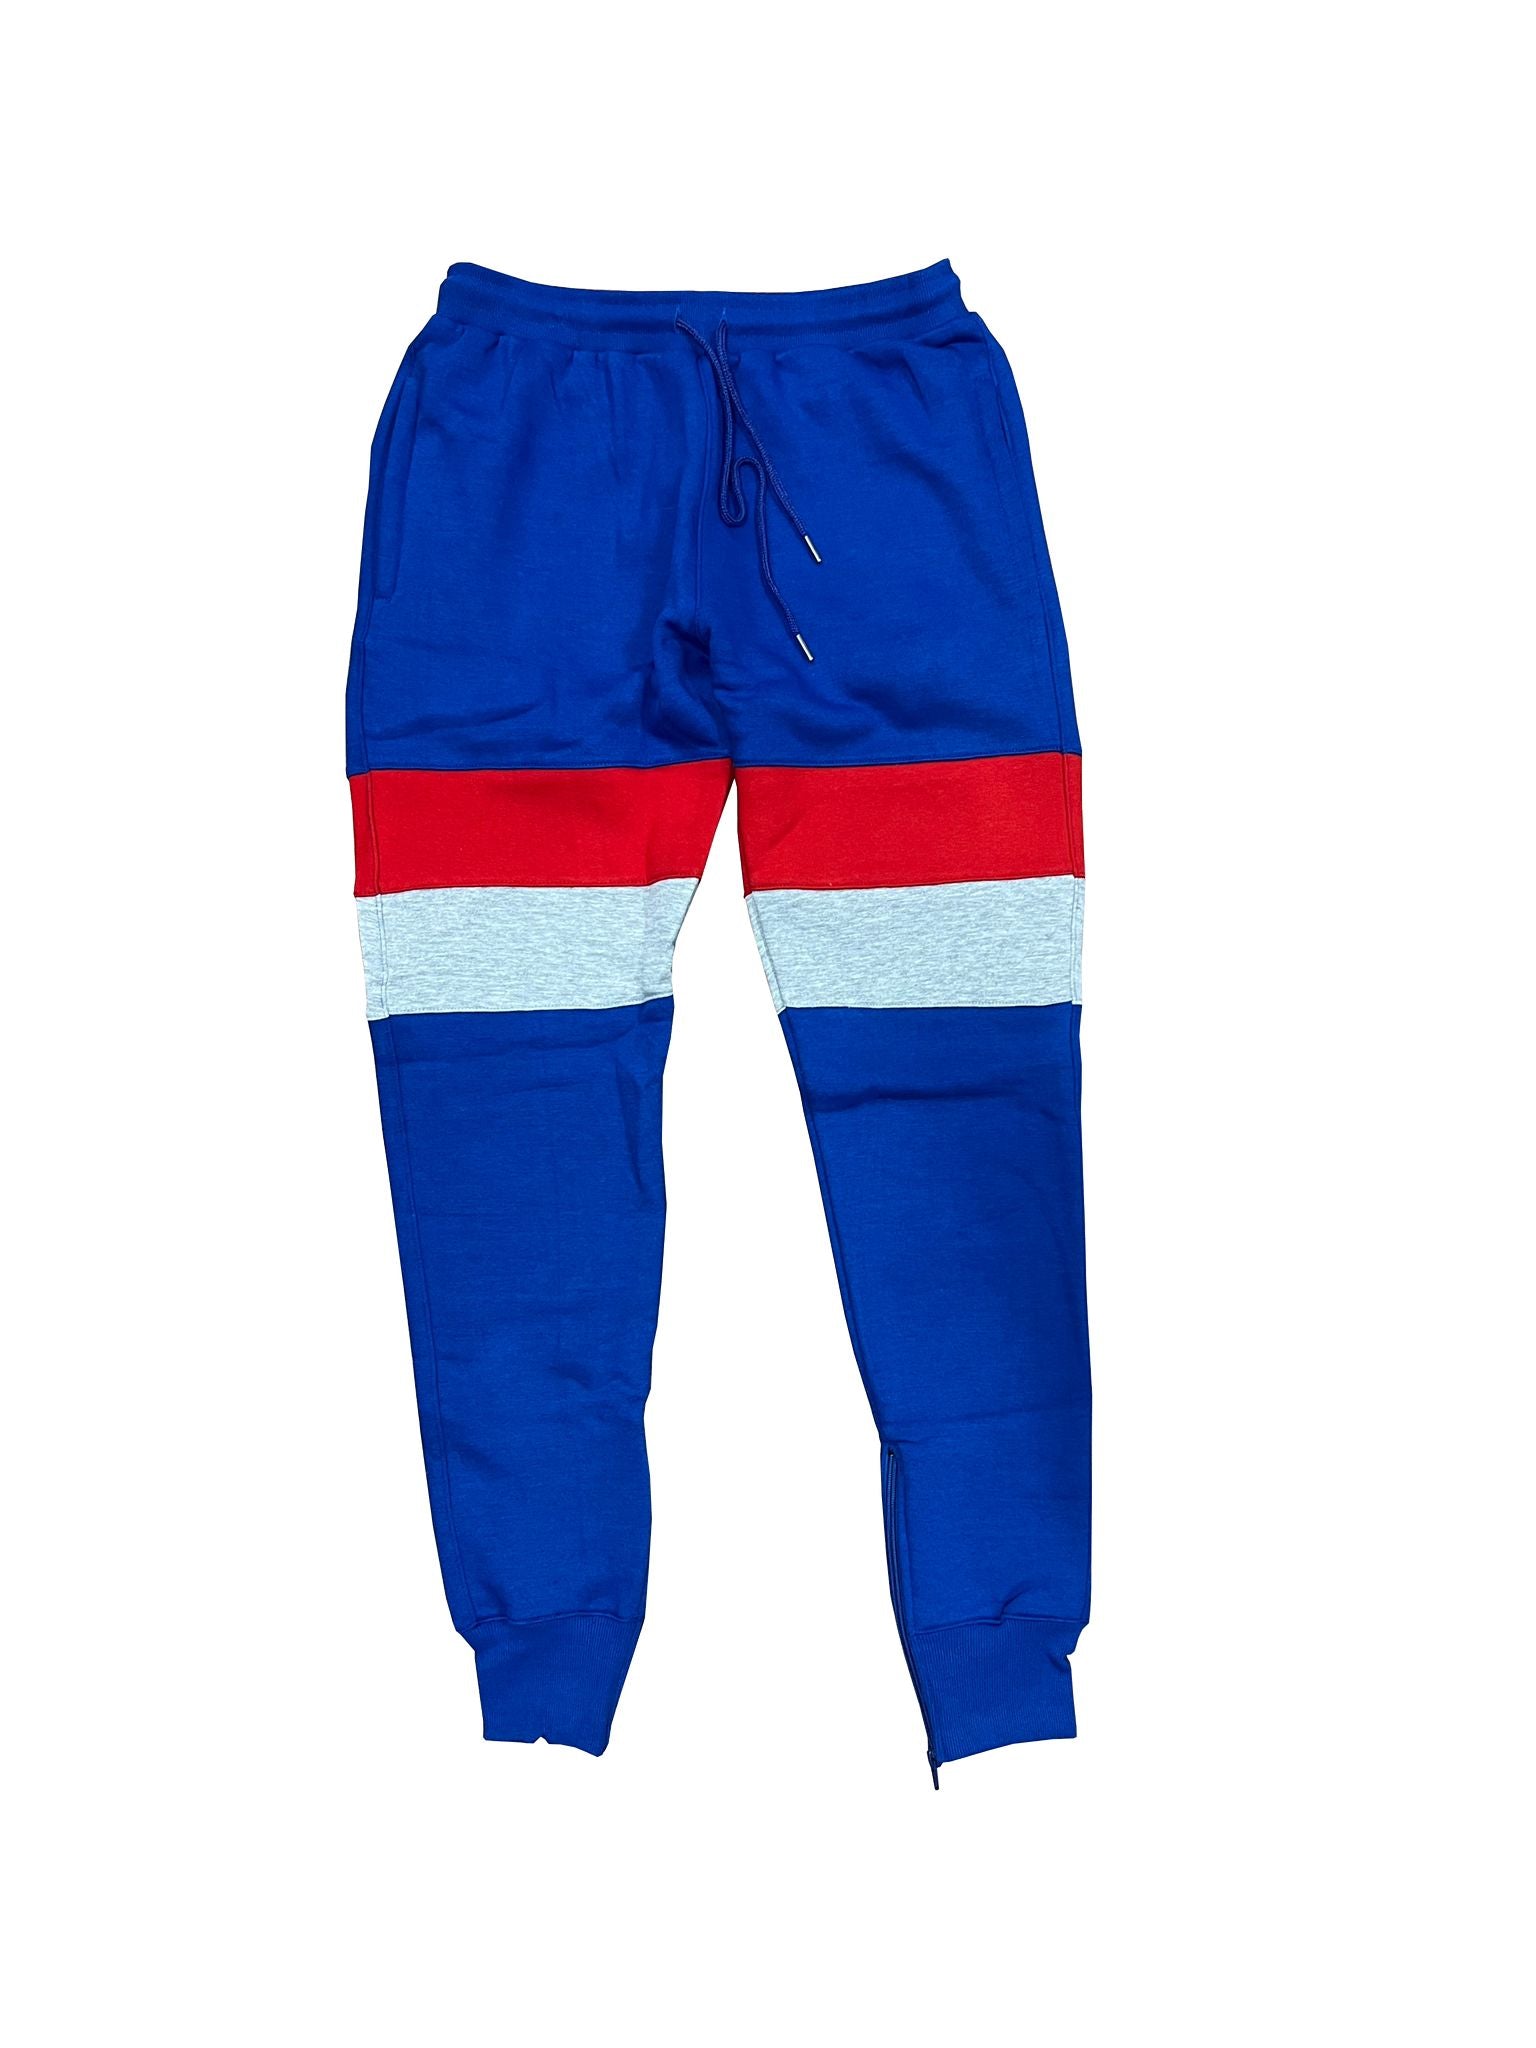 Dipset Couture Blue/Red/Grey Sweatsuit